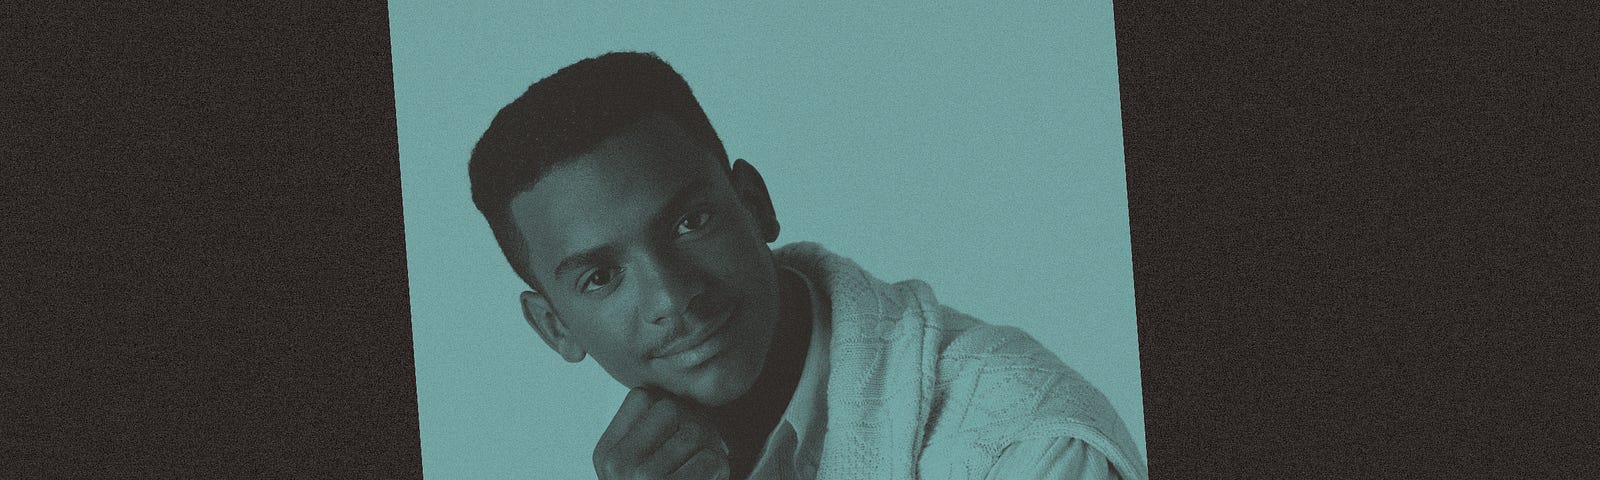 A photo of Carlton Banks from the TV show The Fresh Prince of Bel Air.